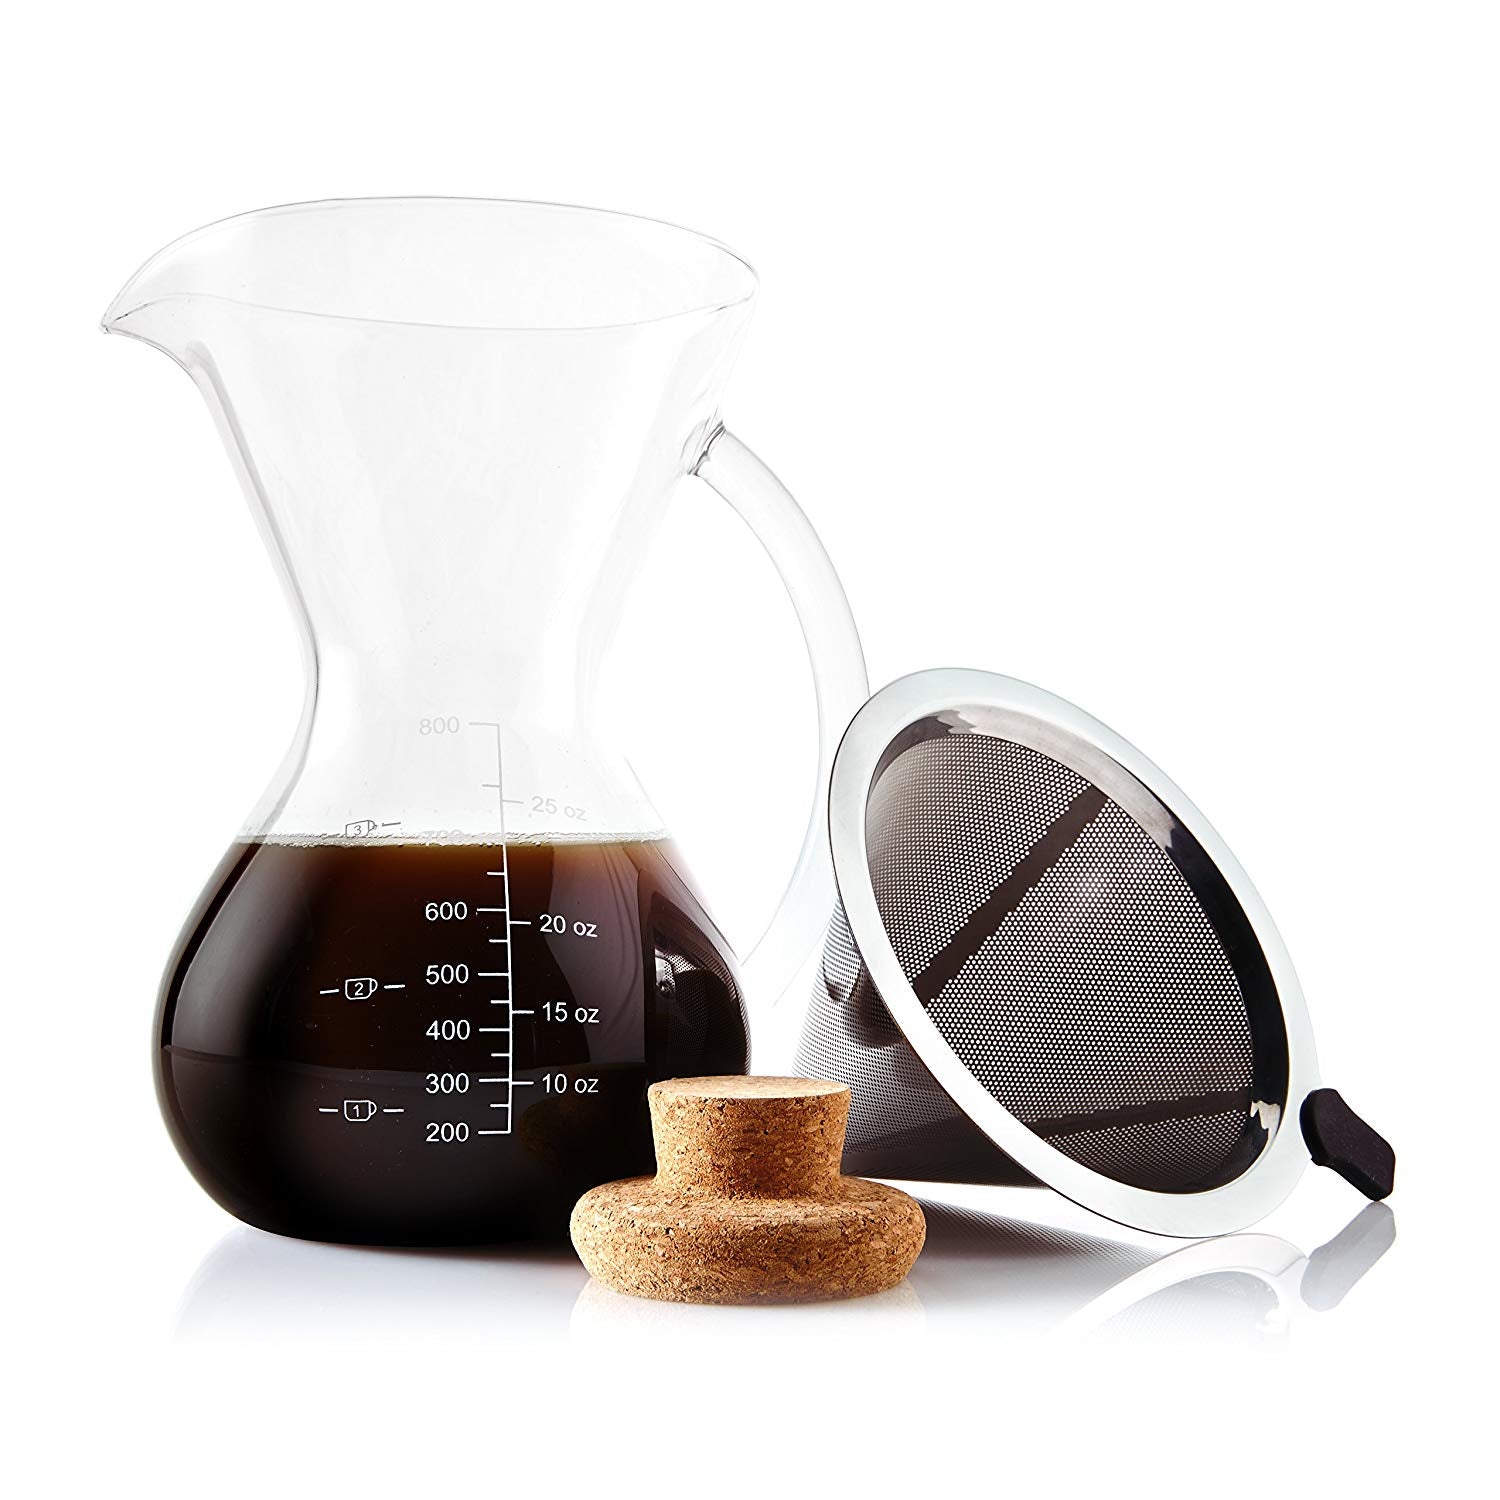 Apace Living Pour Over Coffee Maker Set w/Coffee Scoop and Cork Lid - Elegant Coffee Dripper Pot w/Glass Carafe & Permanent Stainless Steel Filter (800 ml / 27 oz)